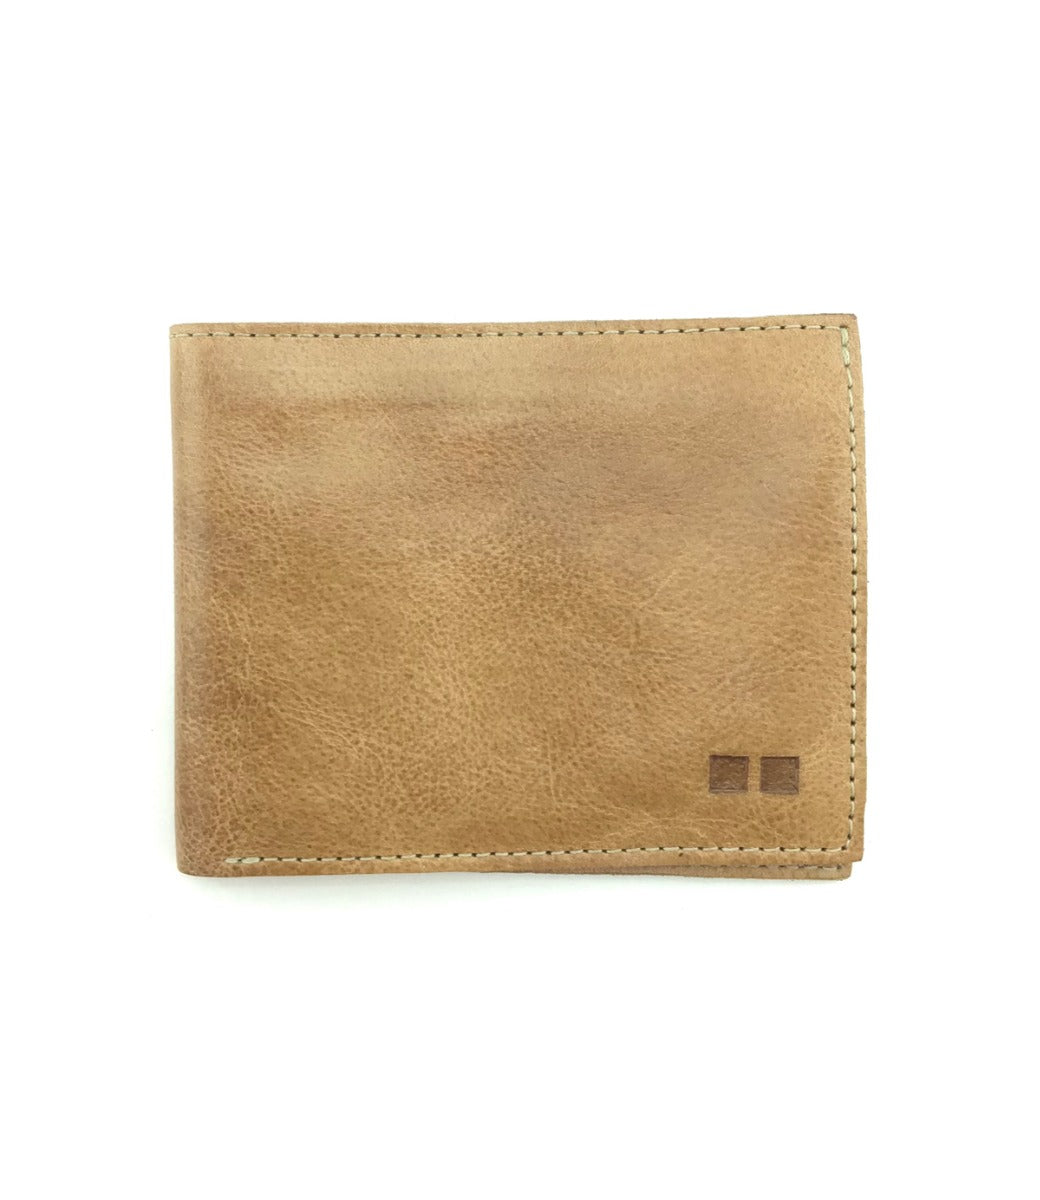 A Bed Stu Amidala tan leather wallet on a white background.